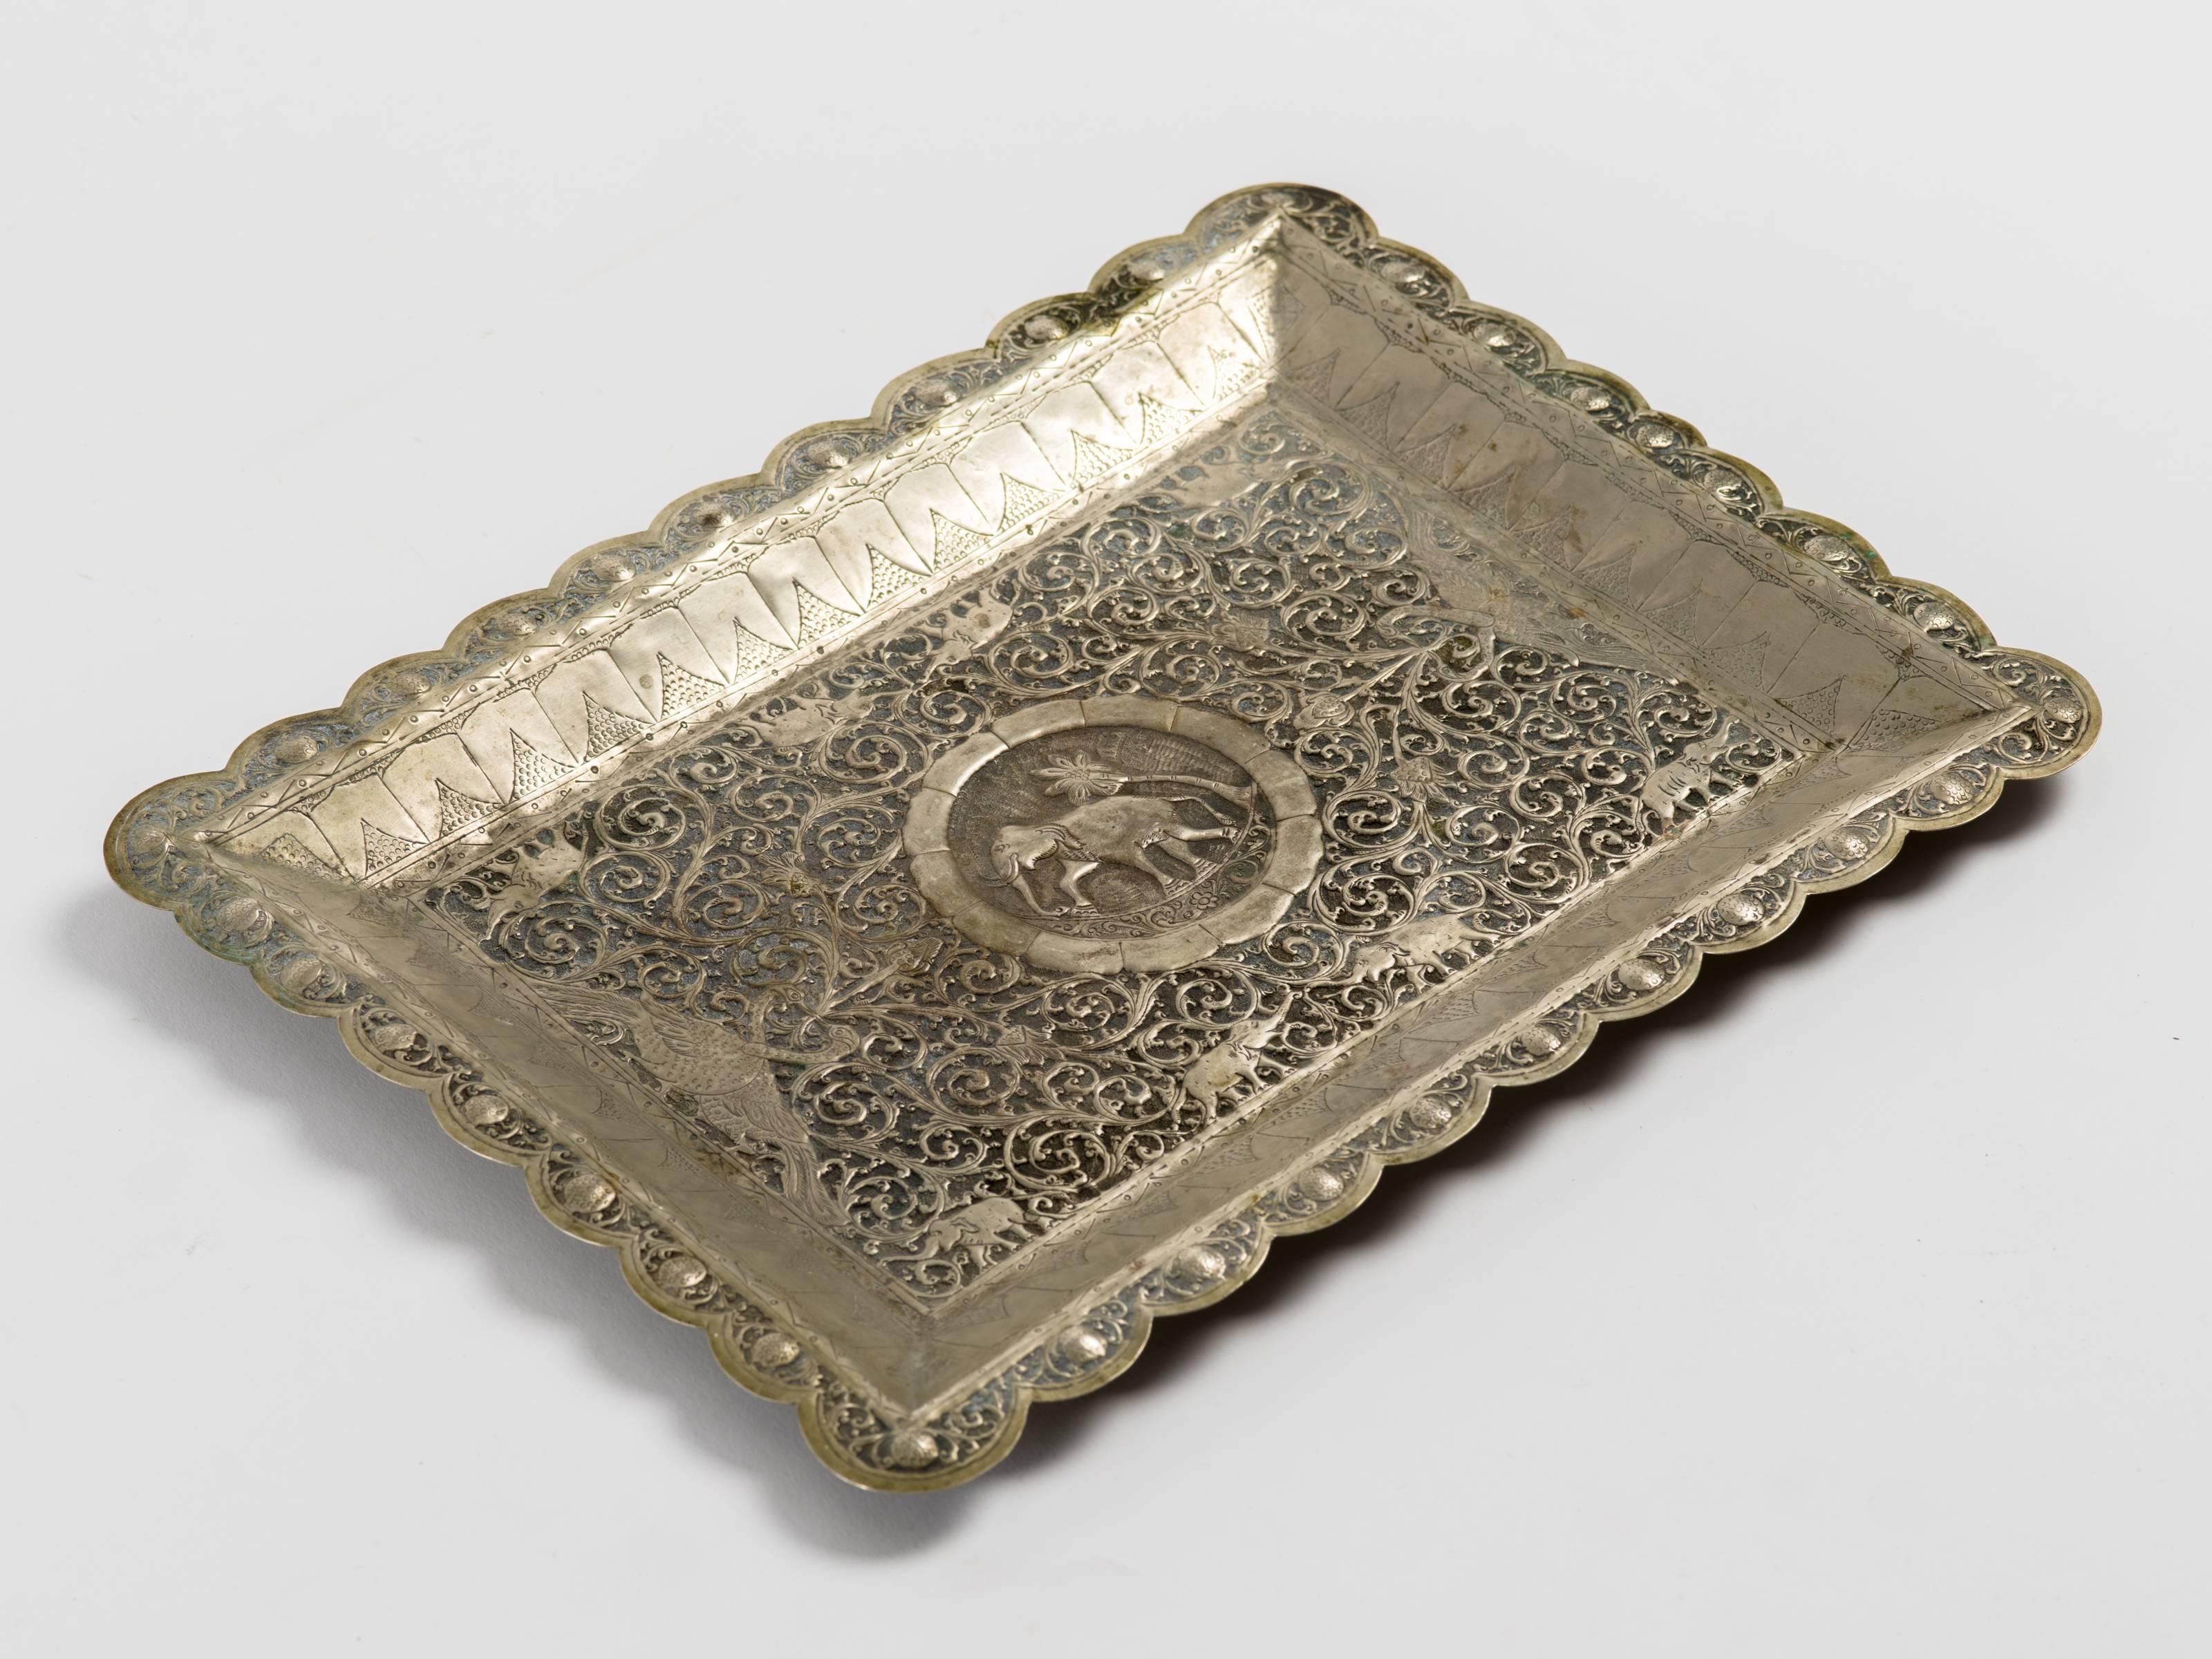 Antique Indian finely hand engraved and embossed tin serving tray with Mughal motifs.